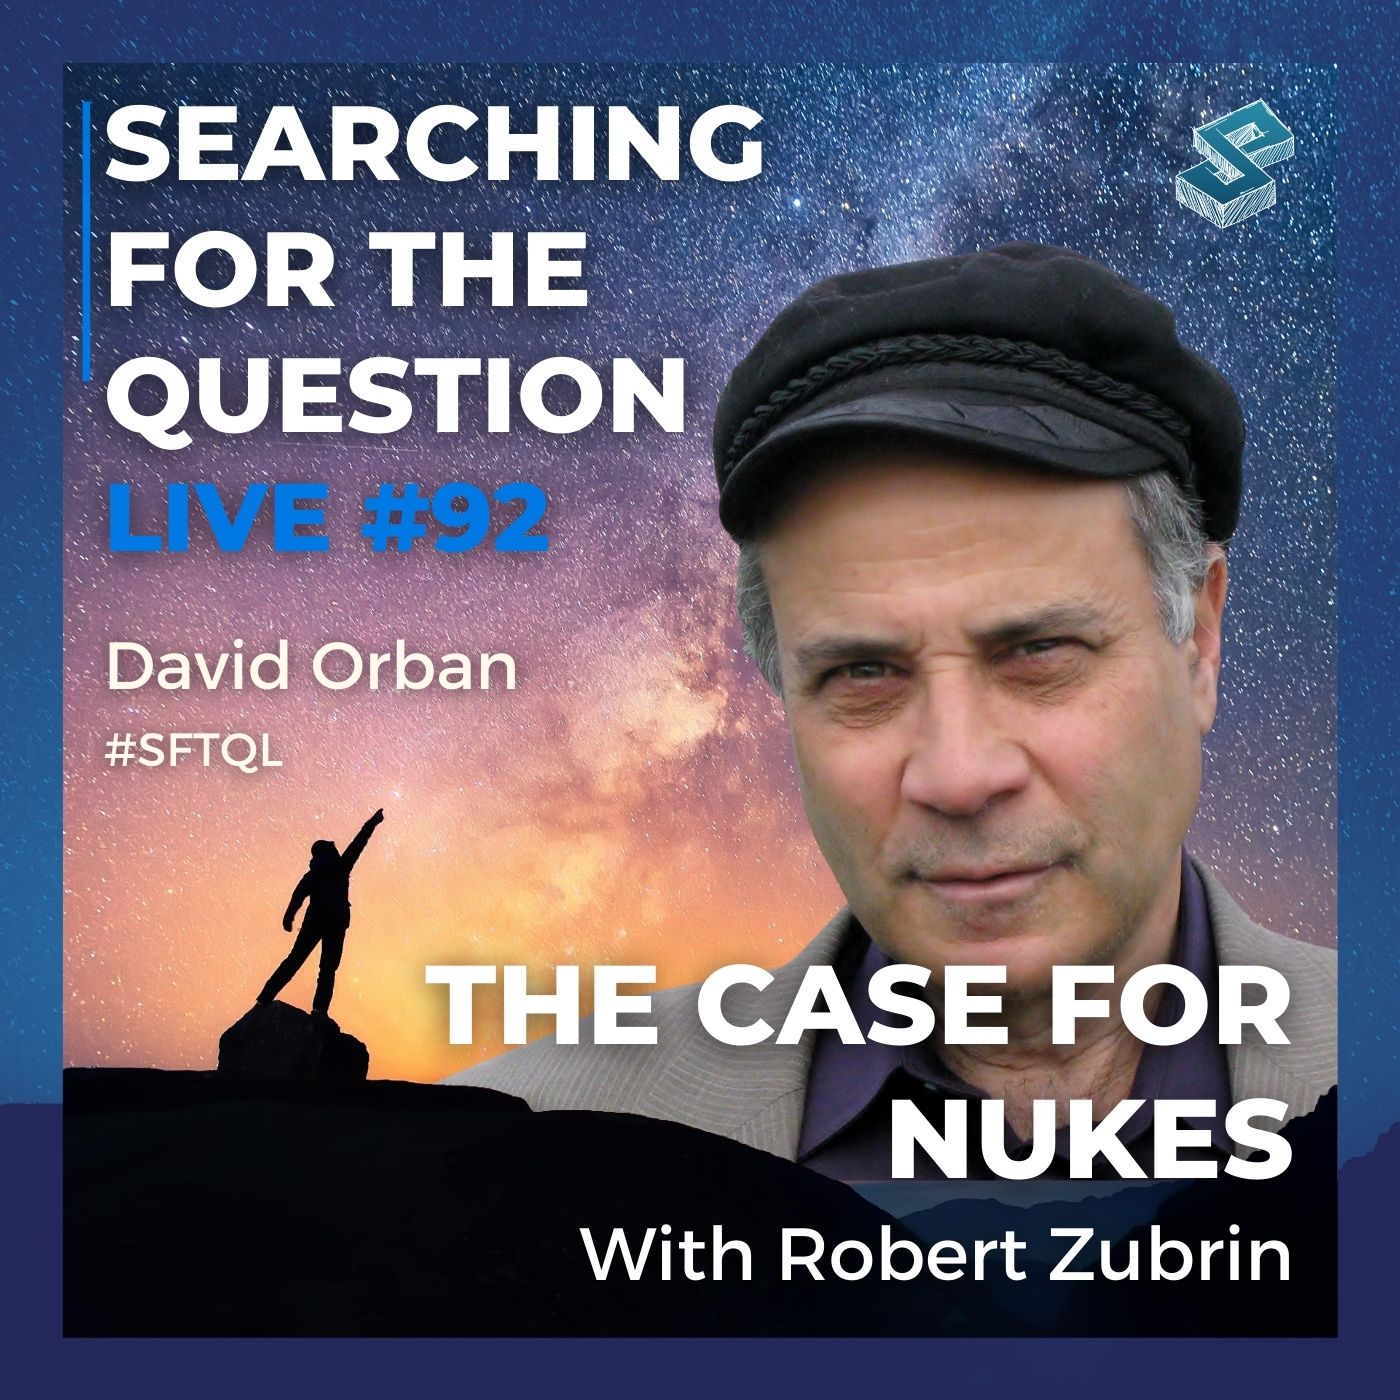 The Case For Nukes with Robert Zubrin - Searching for the Question Live #92